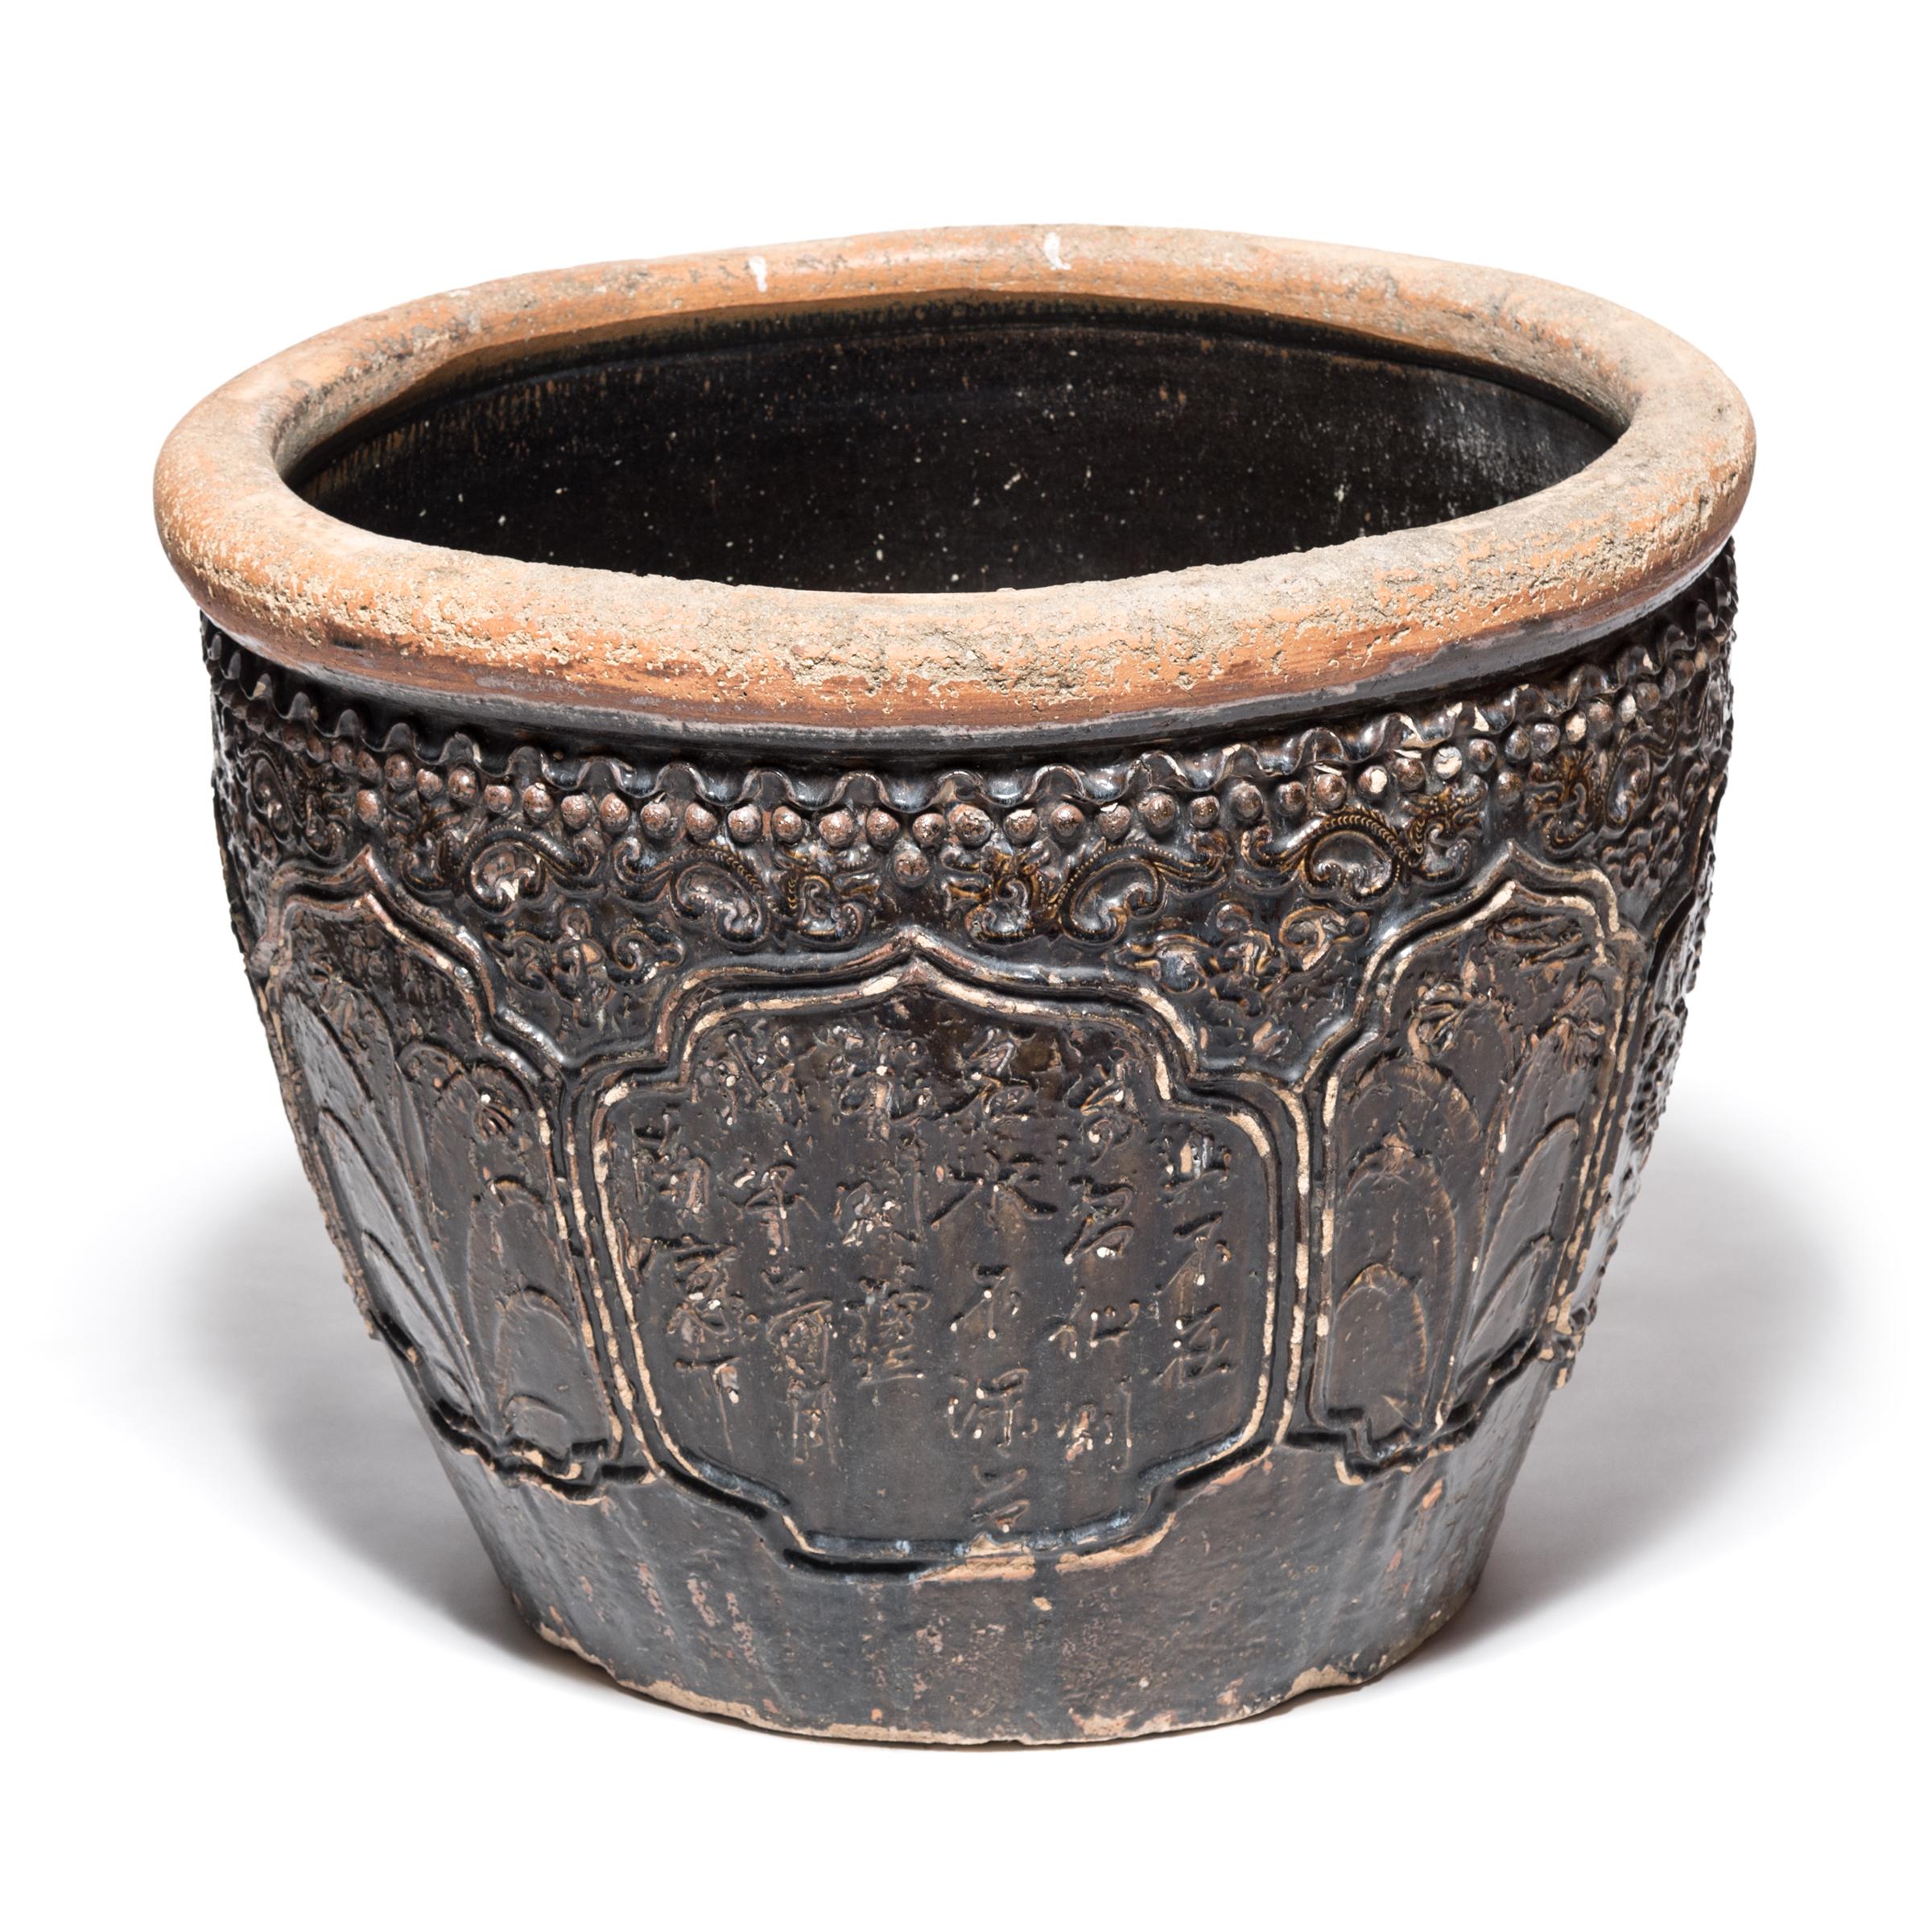 This late 19th century monumental glazed ceramic urn from southern China was originally used for pickling food. Its sculpted high-relief surface depicts floral medallions and abstract dragons, symbols of power and good fortune.